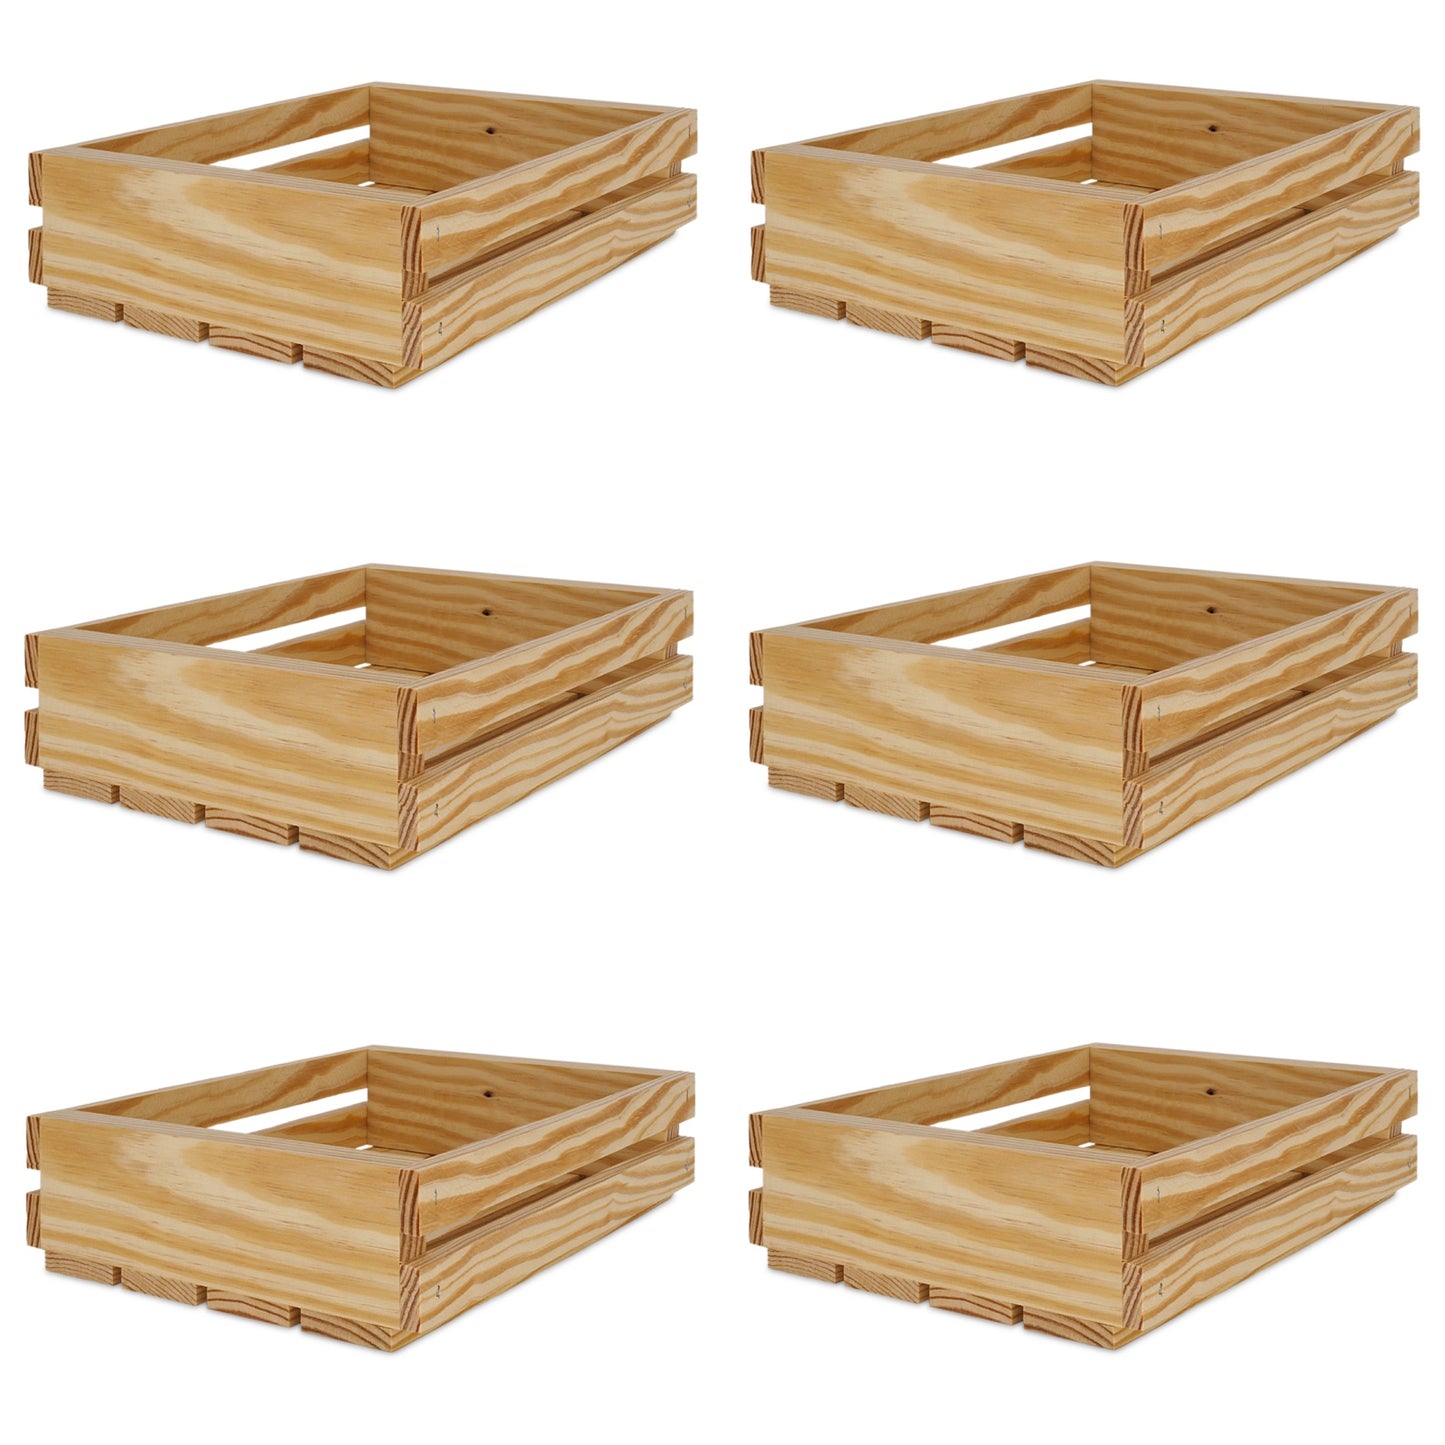 6 Small wooden crates 10x8x2.5